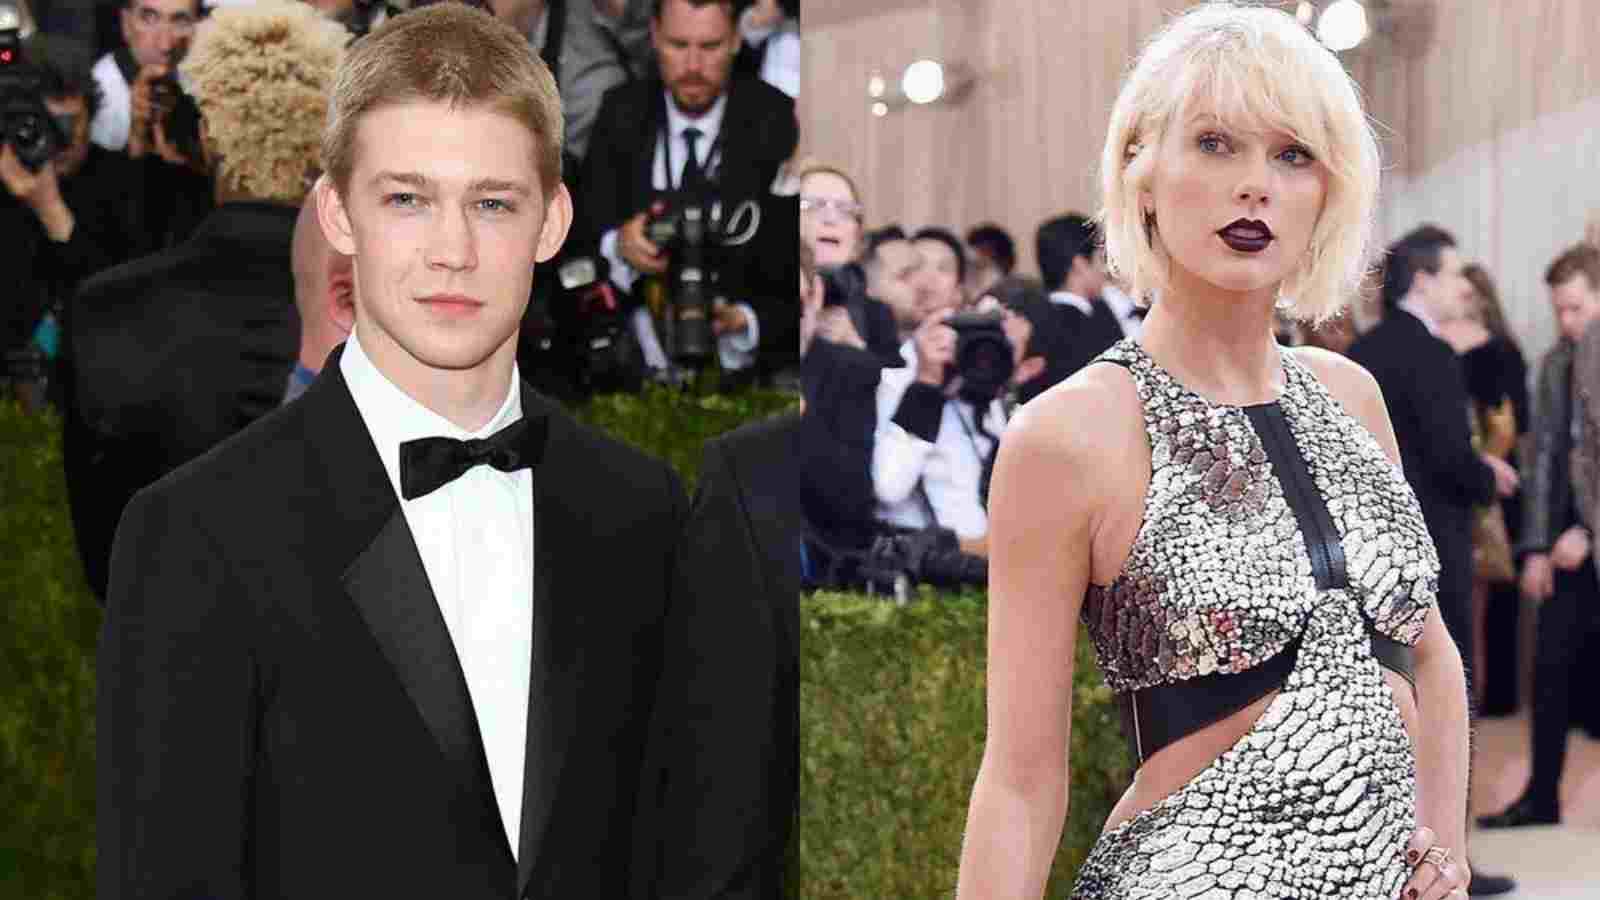 The first time Taylor Swift and Joe Alwyn met.